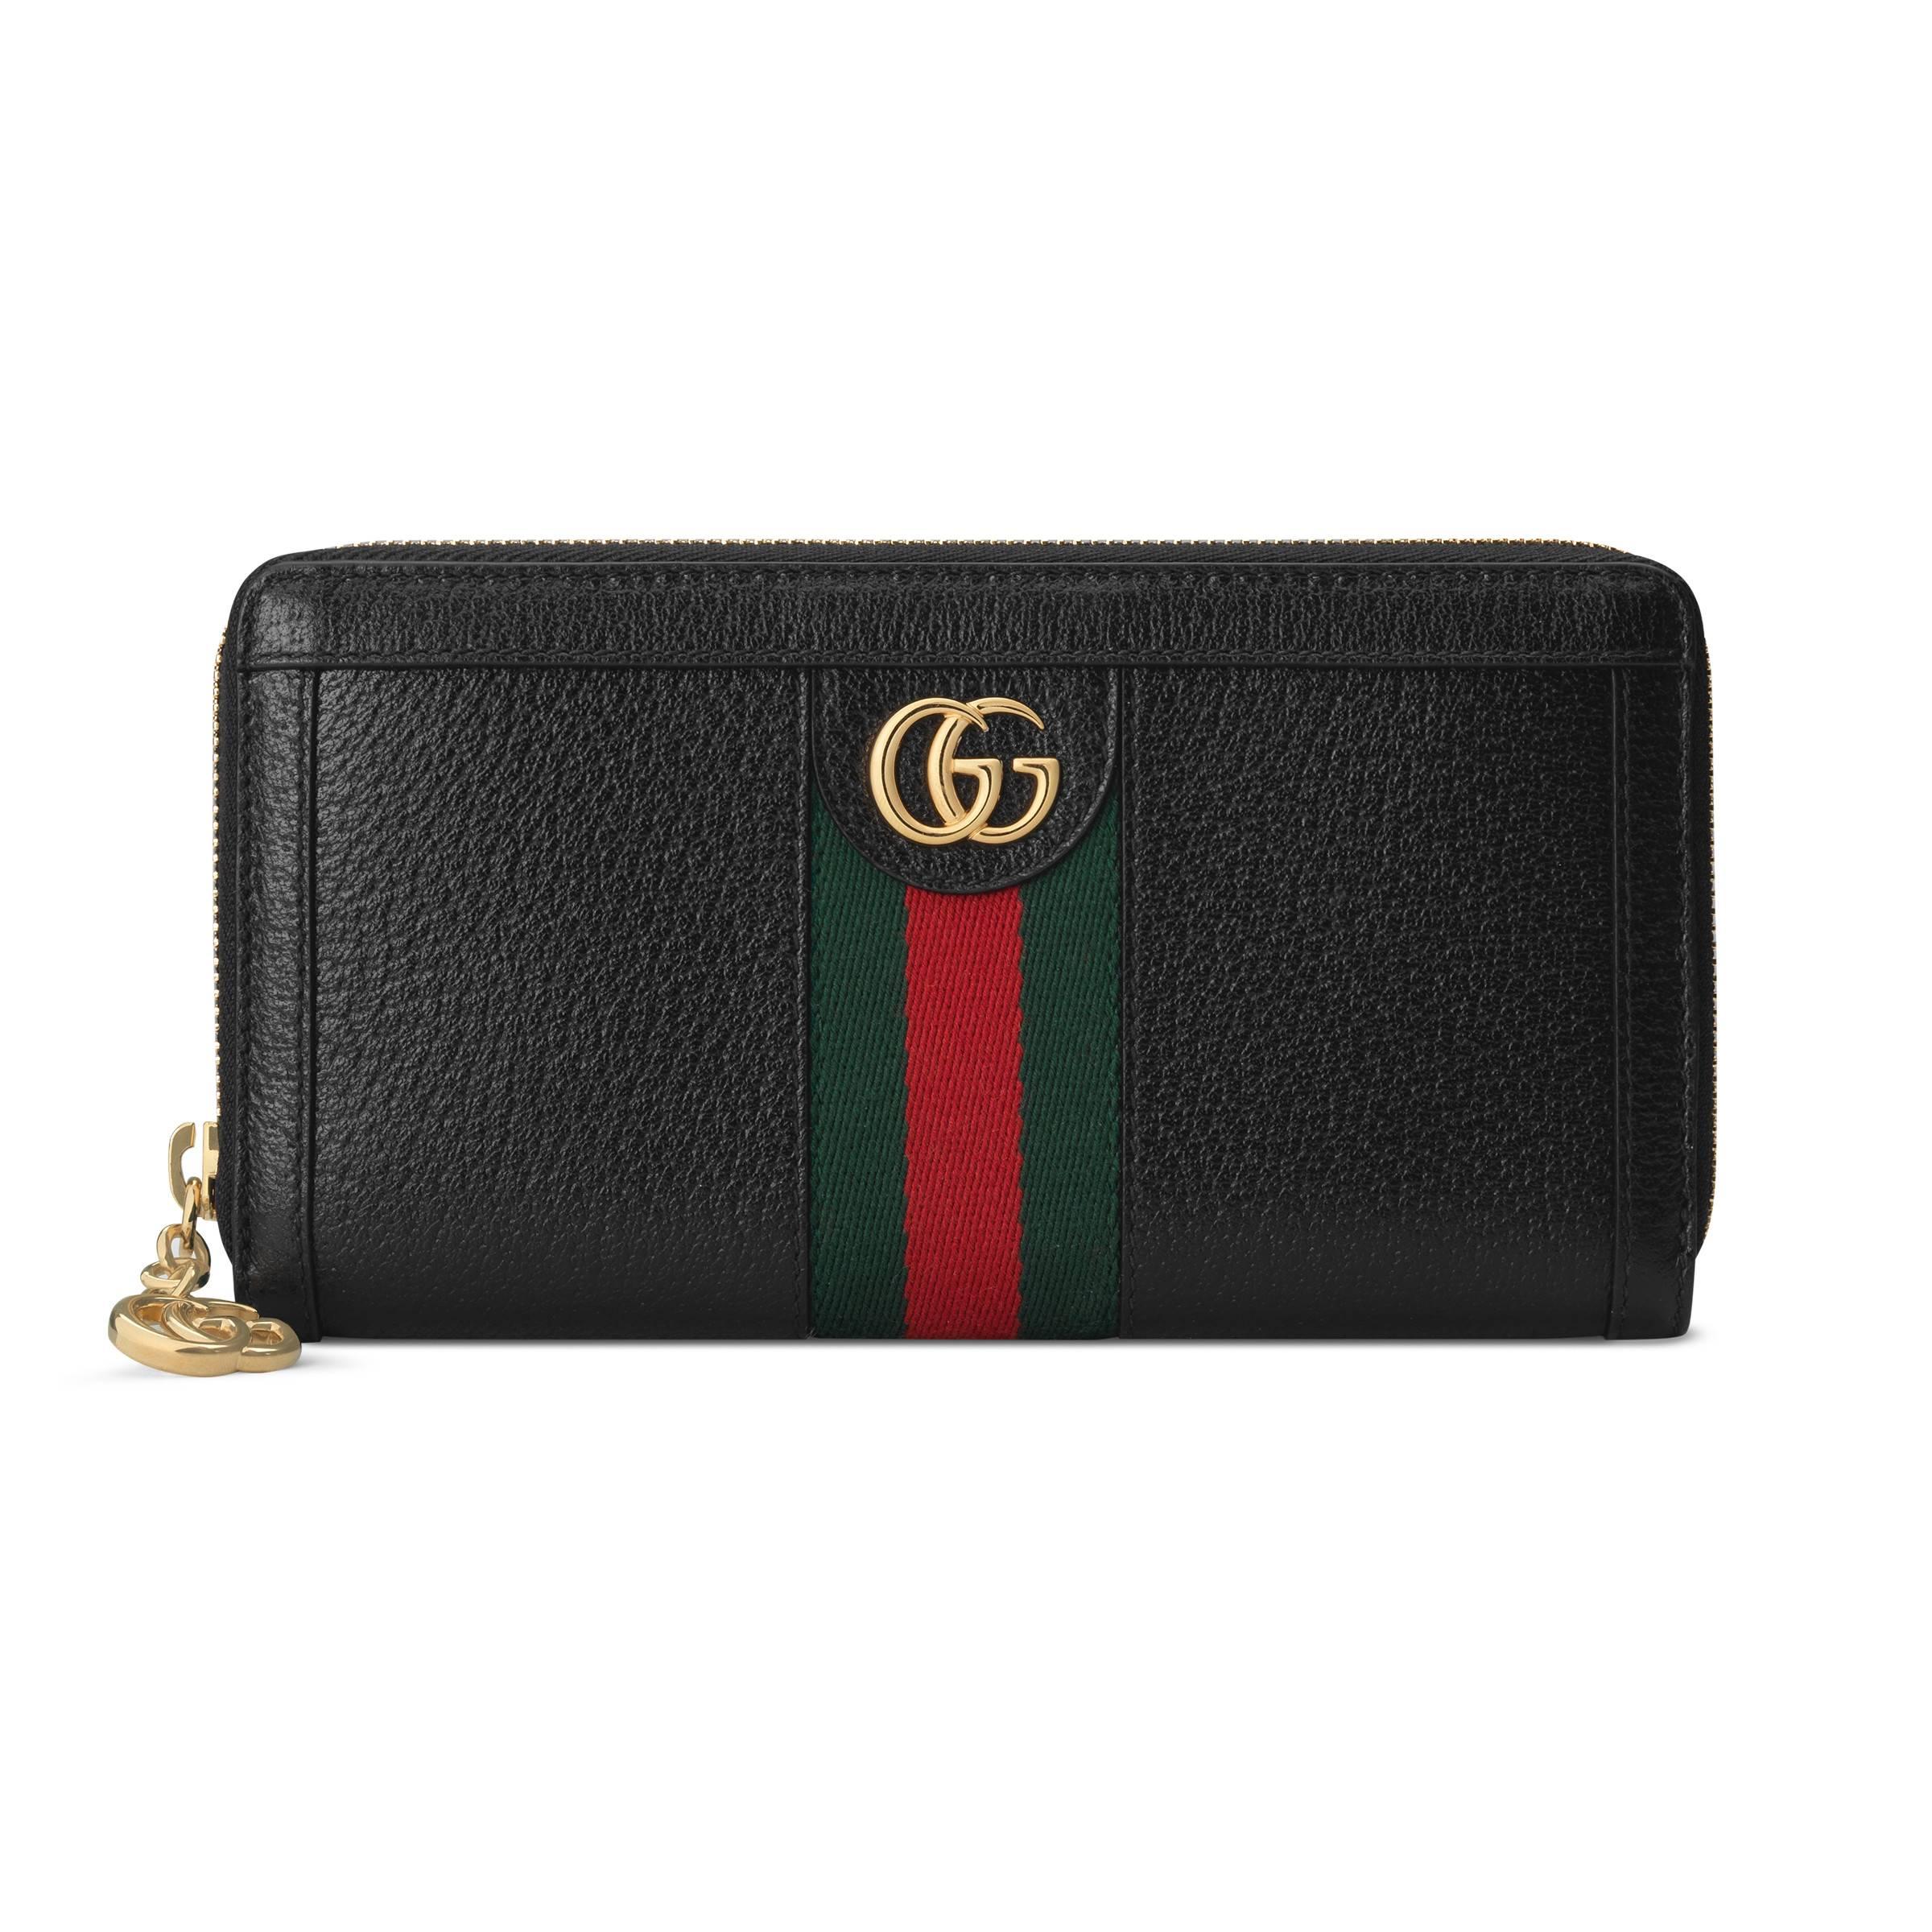 Gucci Leather Ophidia Zip Around Wallet in Black Leather (Black) - Lyst